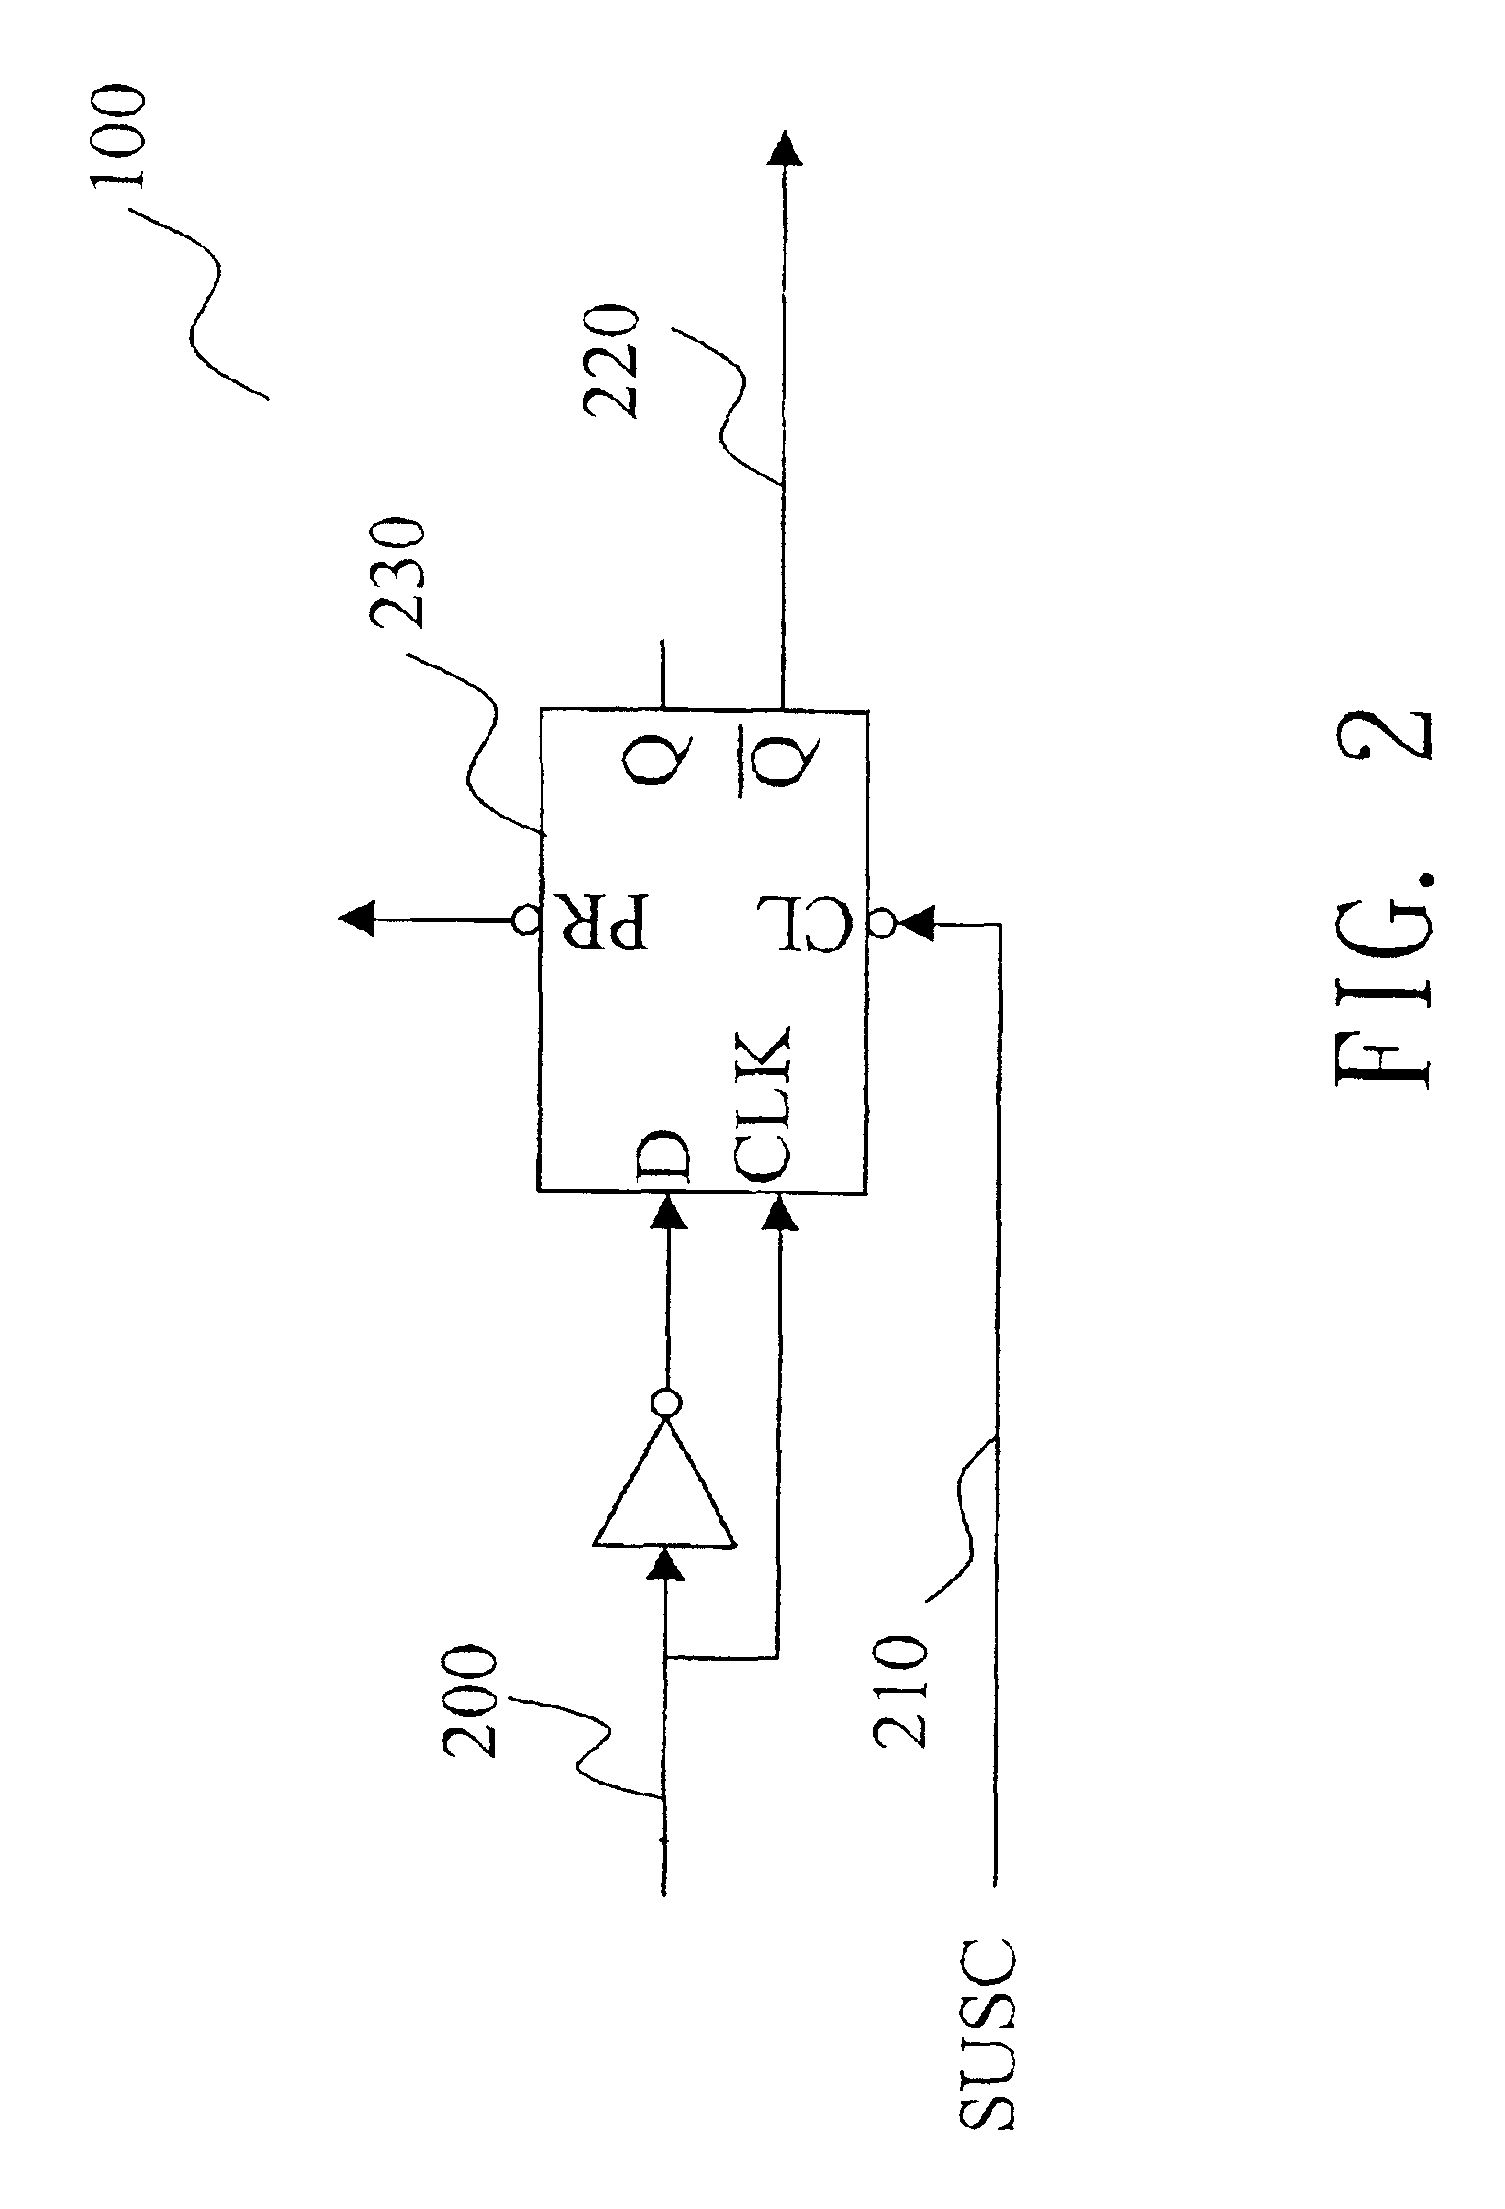 Method and motherboard for automatically determining memory type